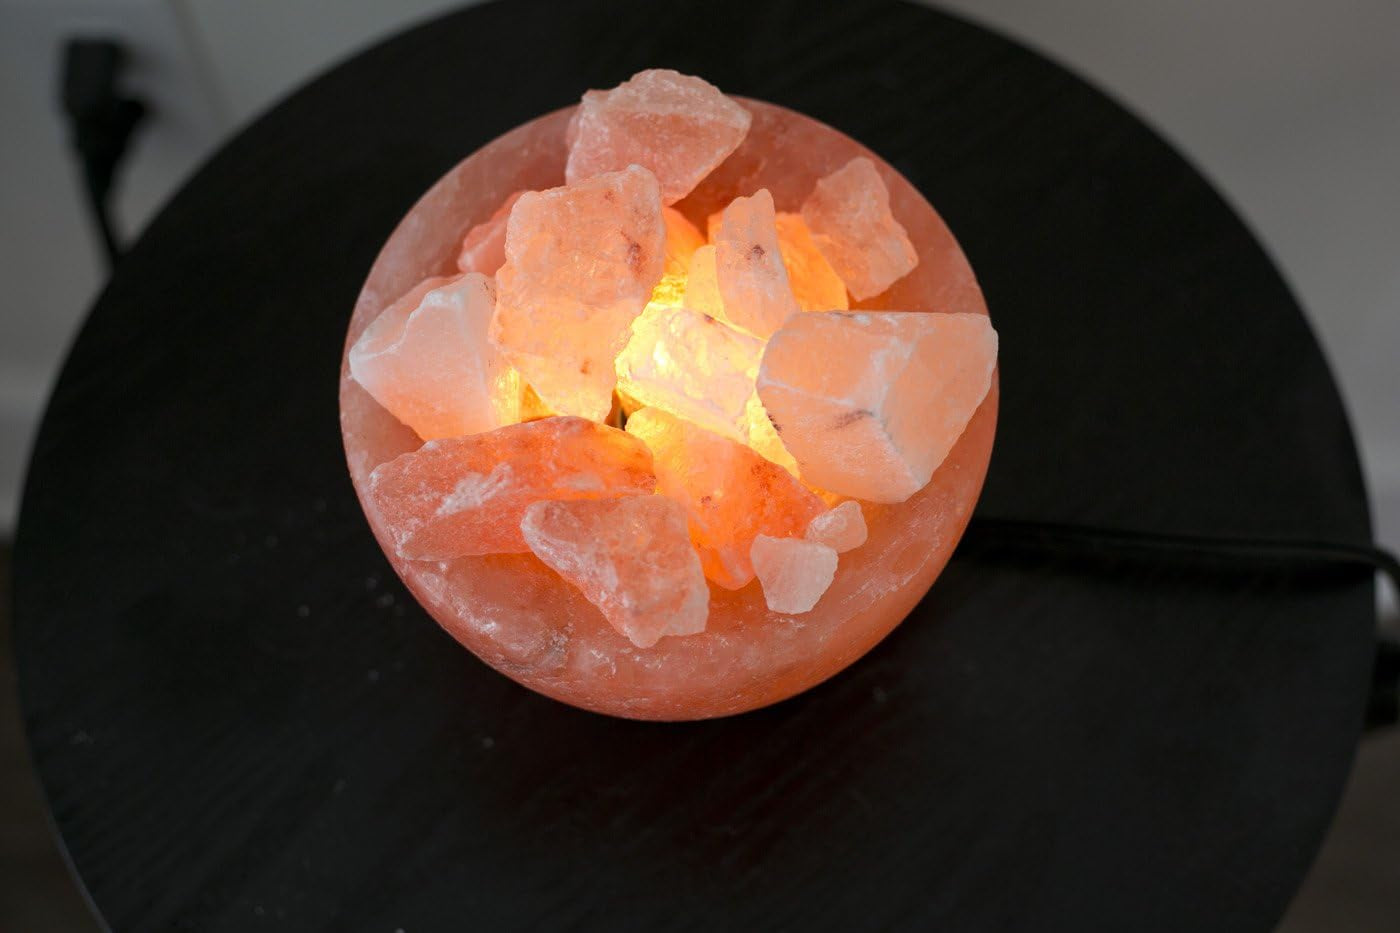 Enhance Your Space with the Warm Glow of Ambient Authentic Natural Himalayan Salt Lamp Bowl – Hand Crafted from Genuine Crystal Salt Rock with UL Listed Dimmer Switch